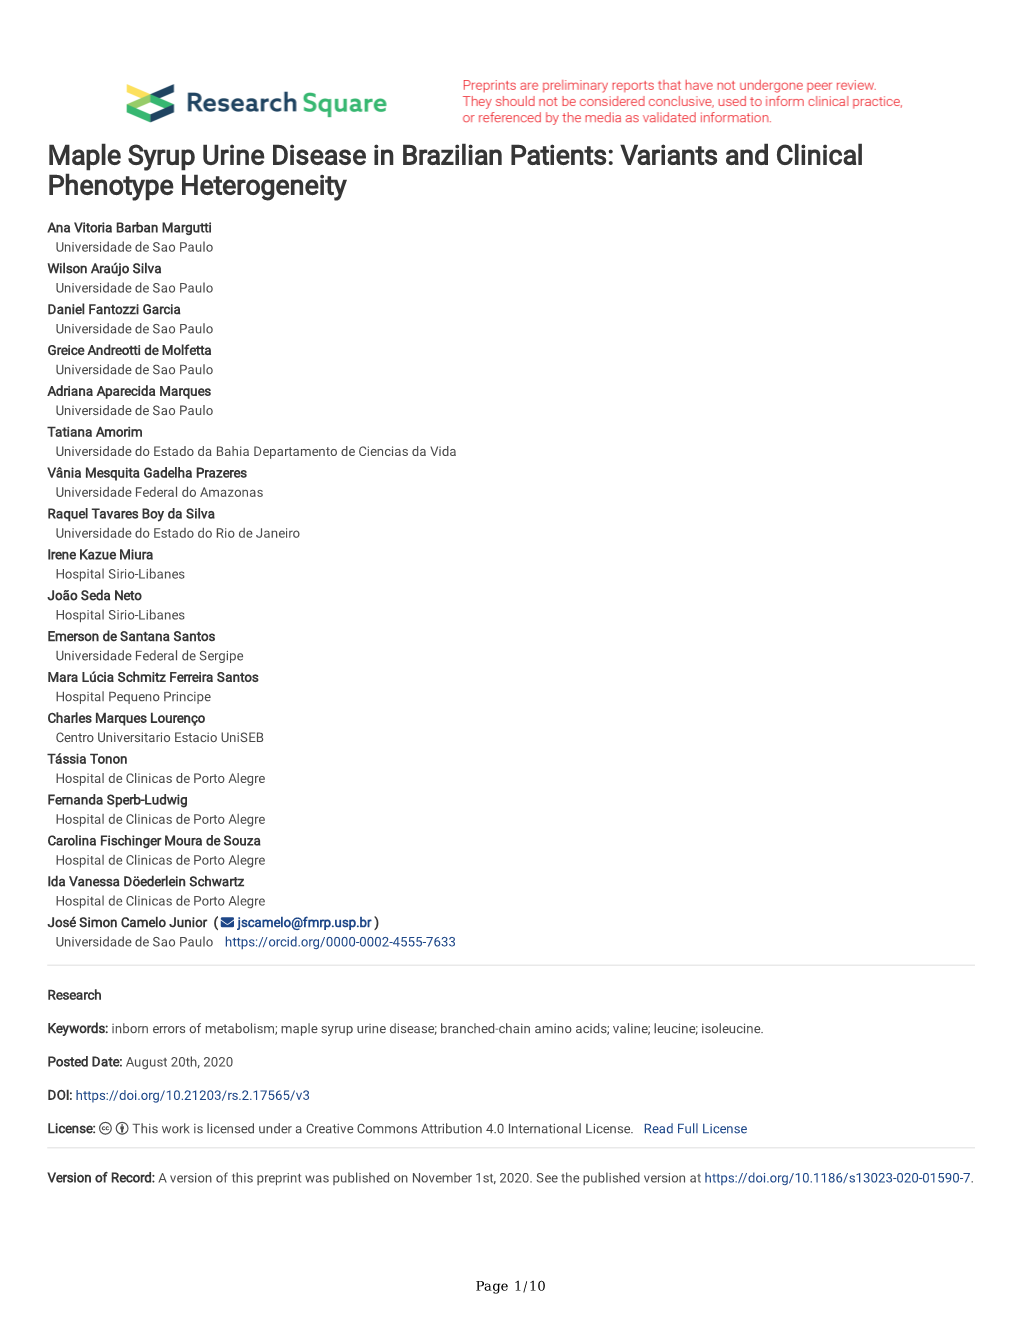 Maple Syrup Urine Disease in Brazilian Patients: Variants and Clinical Phenotype Heterogeneity